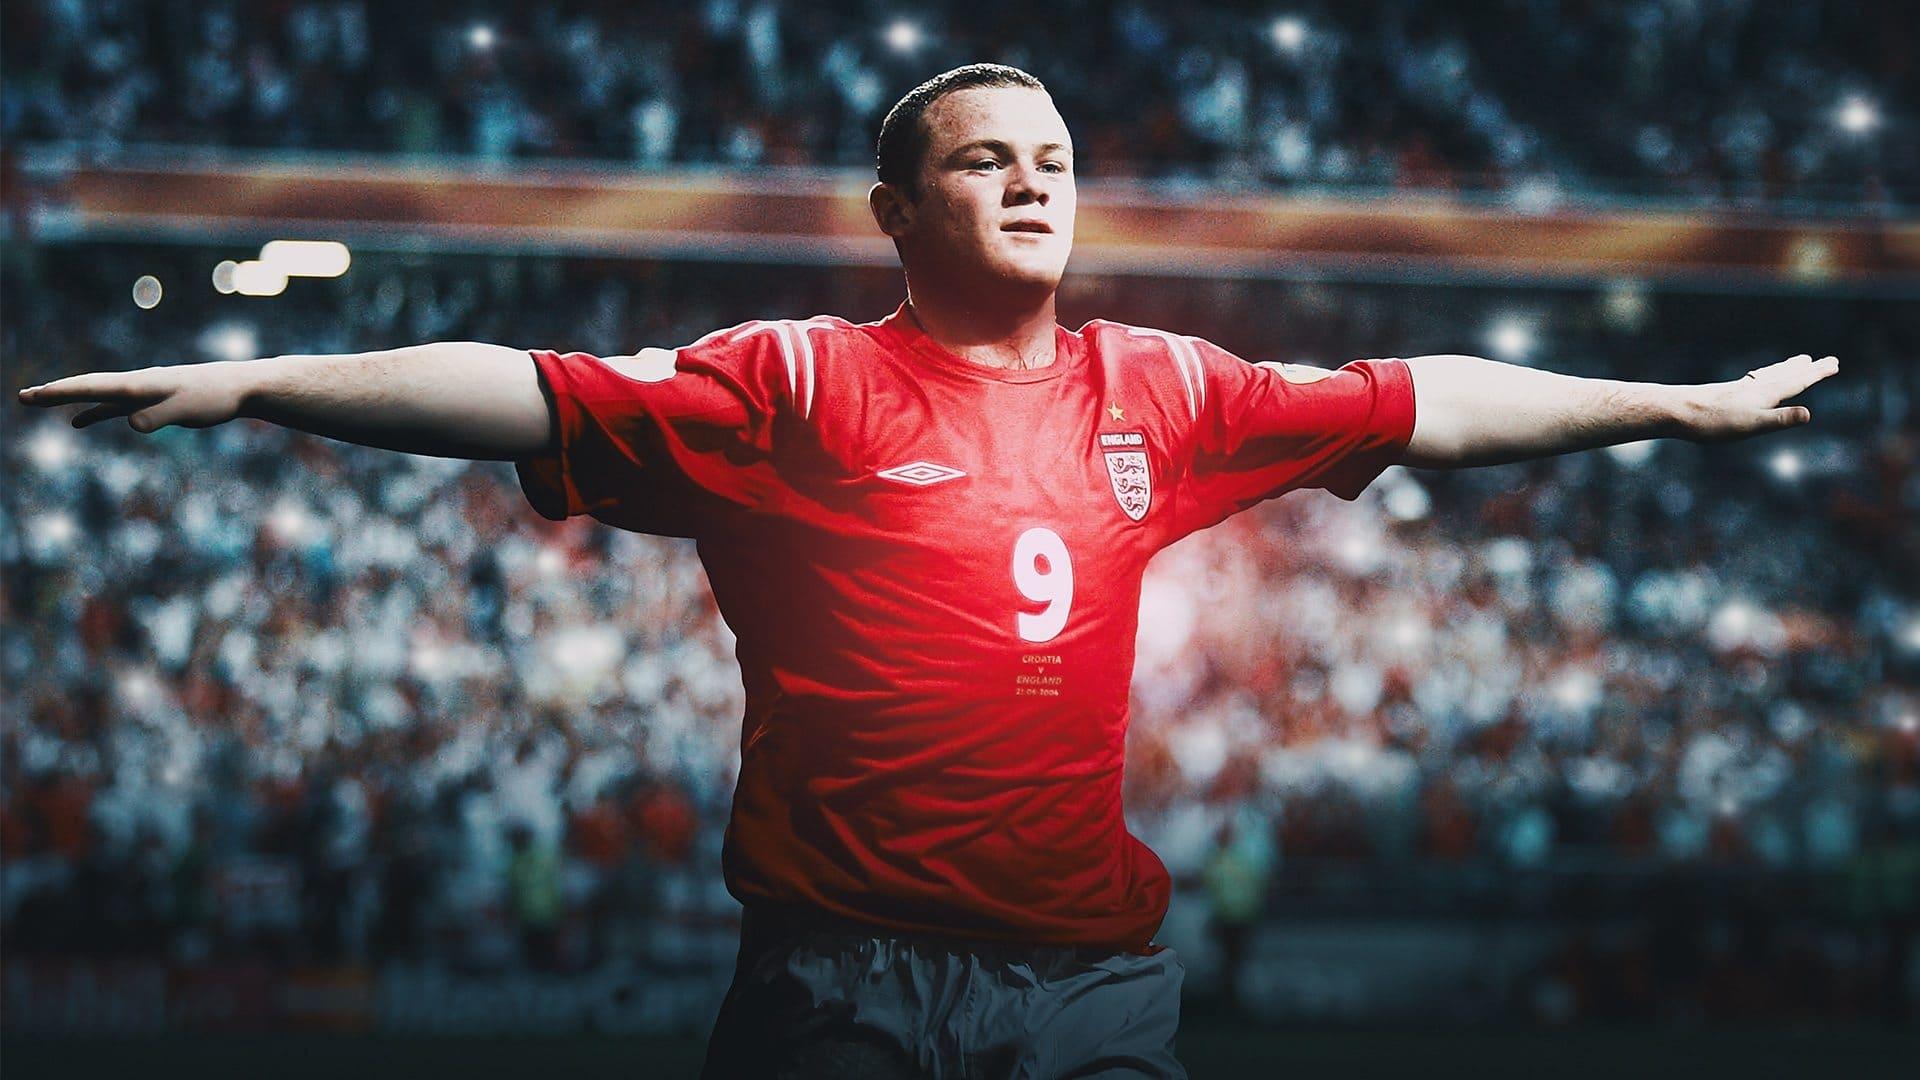 Rooney 2004: World At His Feet backdrop